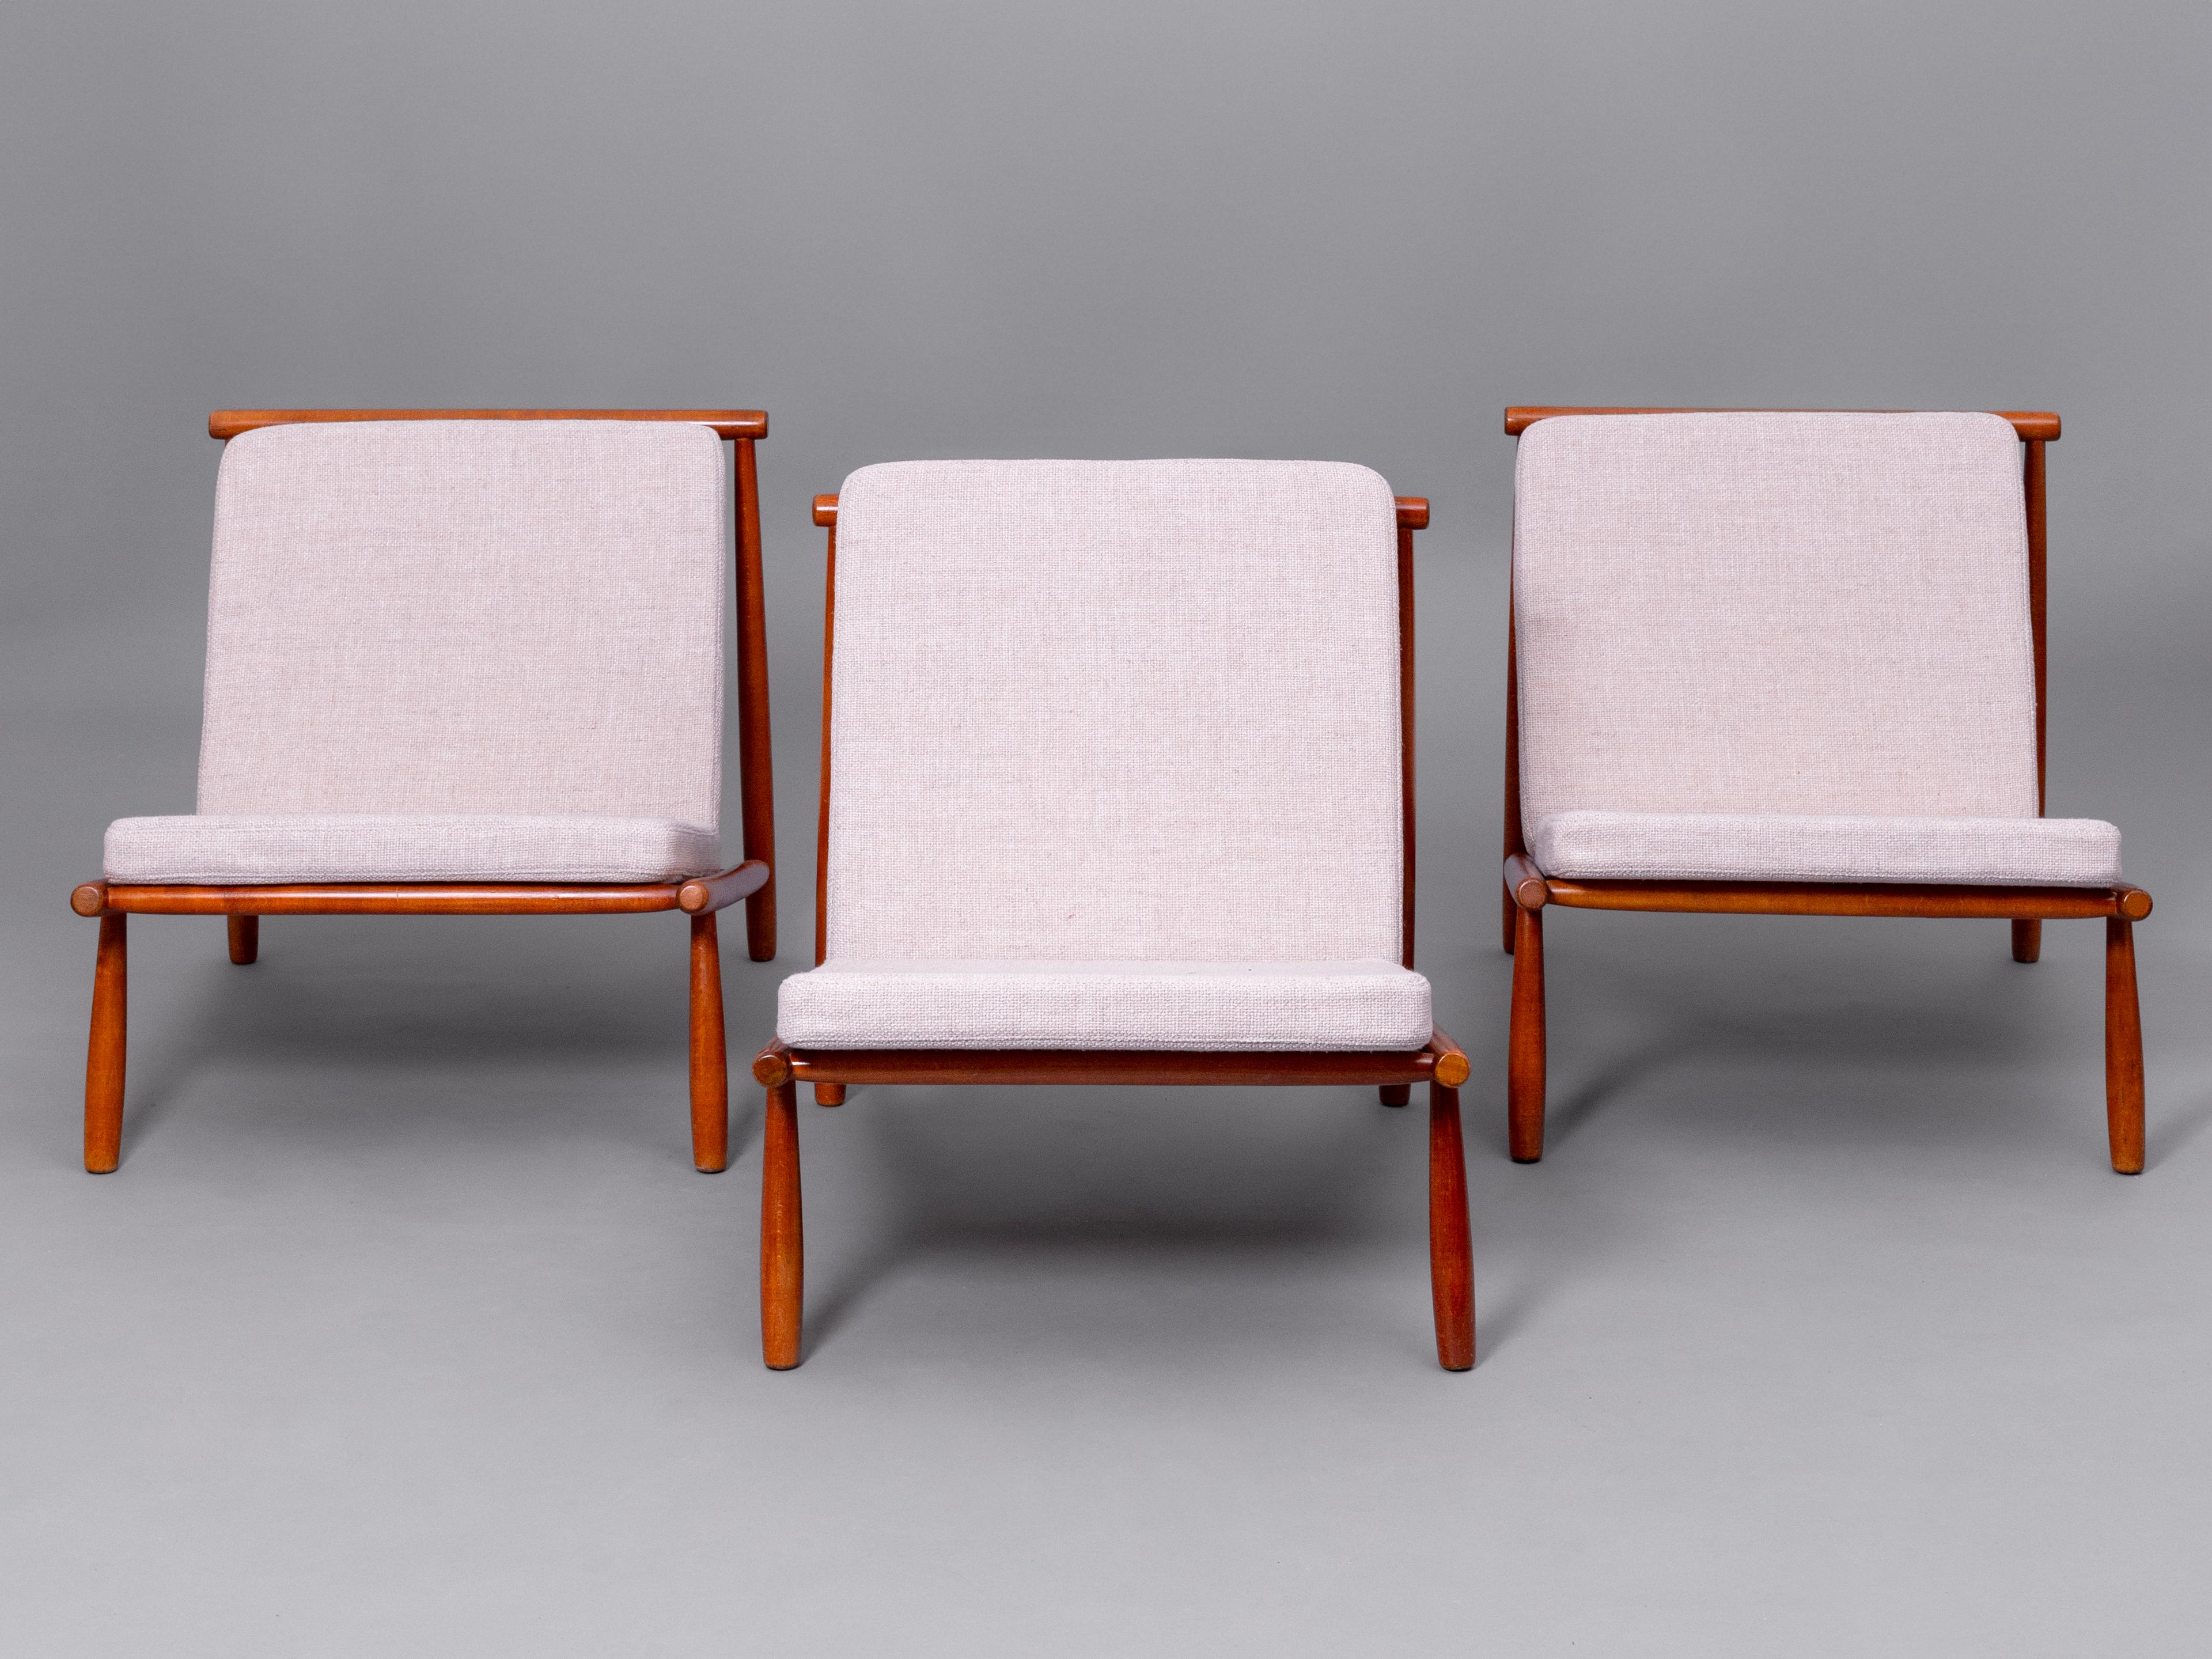 Three 'Domus' armchairs in teak and upholstery designed by Alf Svensson, Sweden, 1960s. 

These armchairs were conceived in a pure Mid-century style. The simple lines that make up the design of the structure on which the cushions rest allow us to